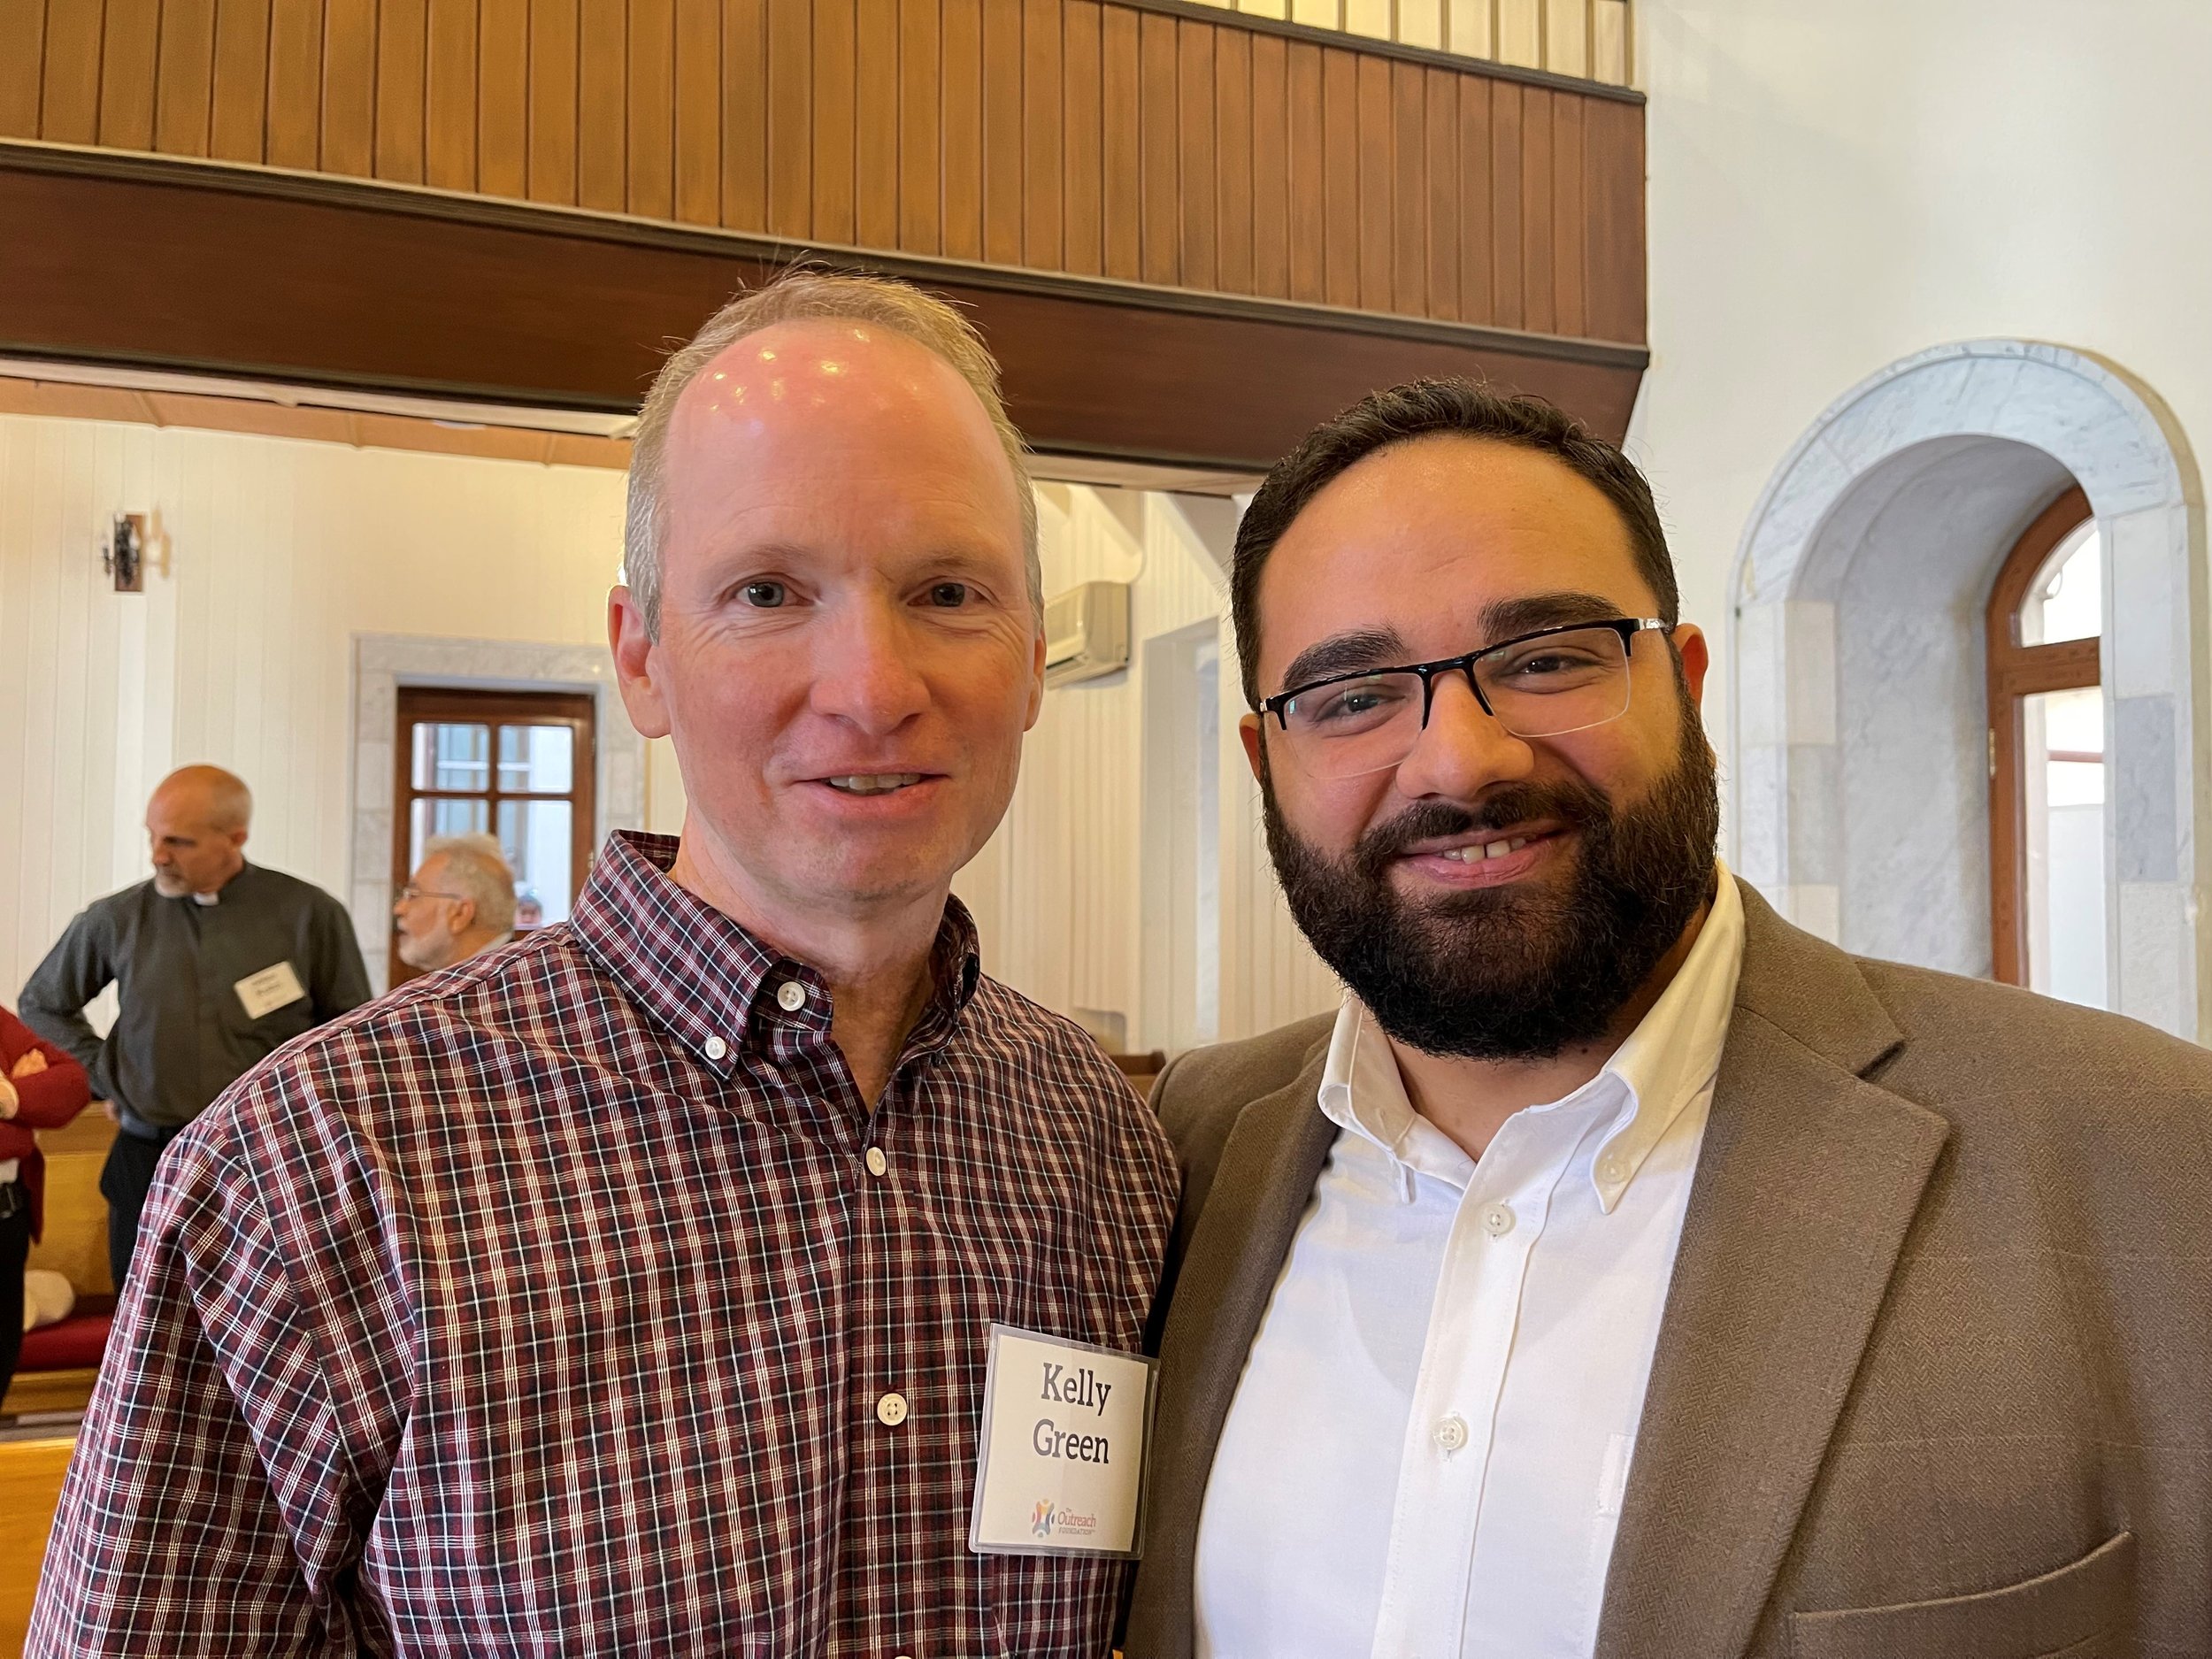  Kelly with Adon Naaman, the seminary grad who is leading the Presbyterian Church in Homs 